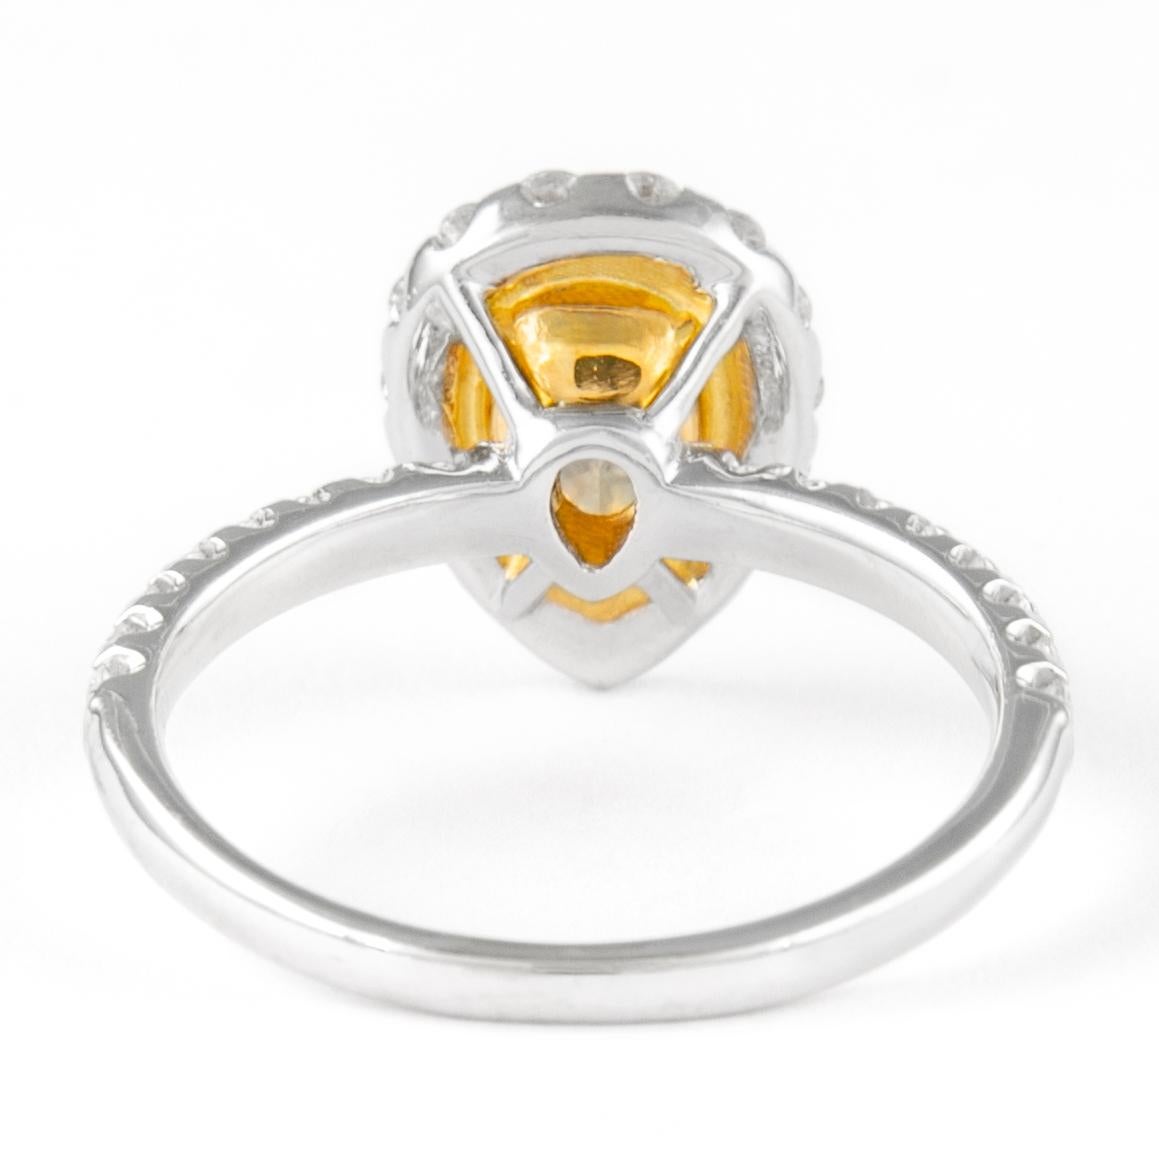 Alexander 1.08ct Fancy Intense Yellow Pear Diamond with Halo Ring 18k In New Condition For Sale In BEVERLY HILLS, CA